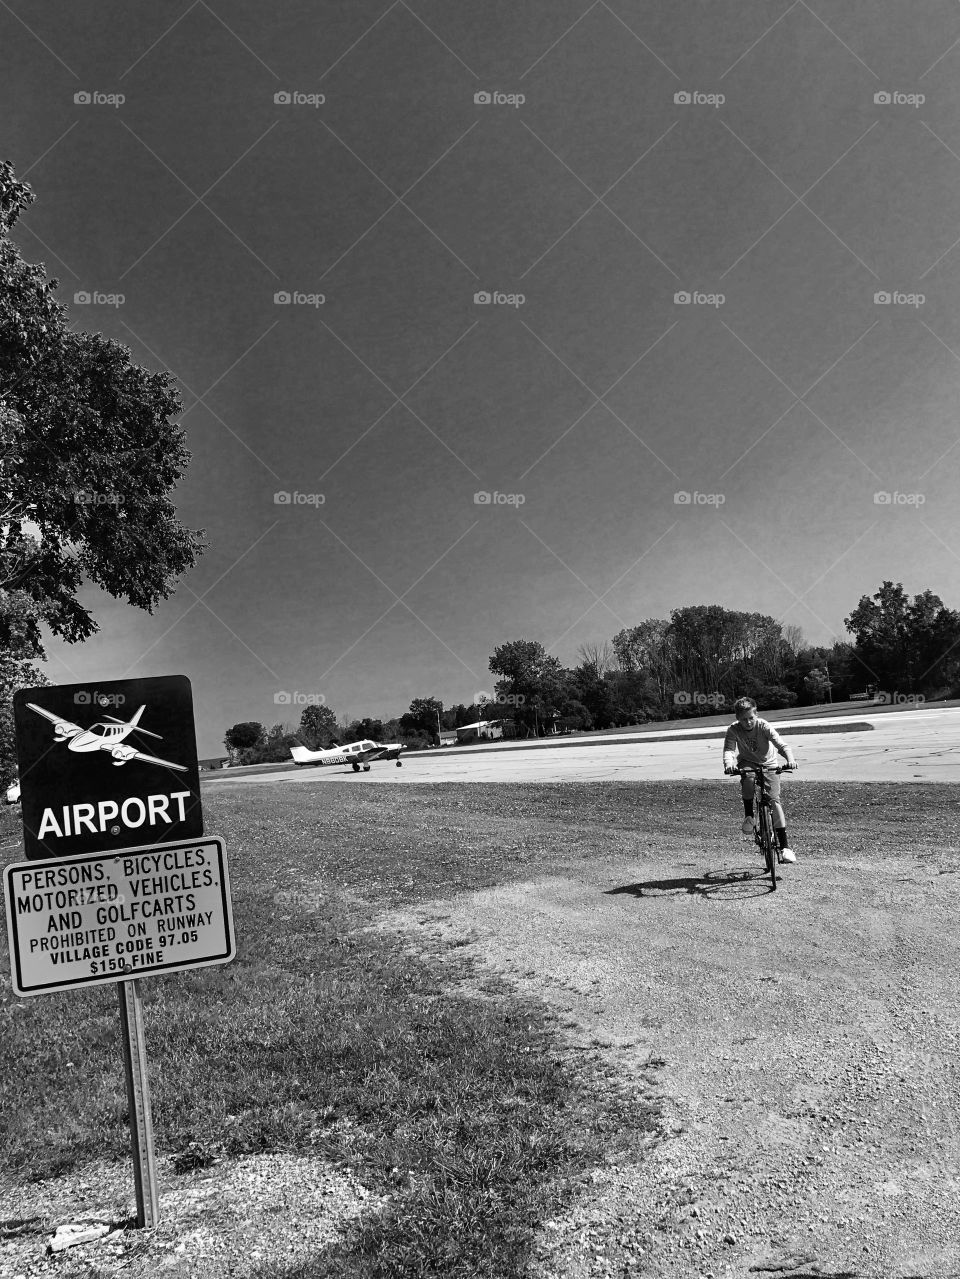 Boy riding bicycle on runway with prohibited sign